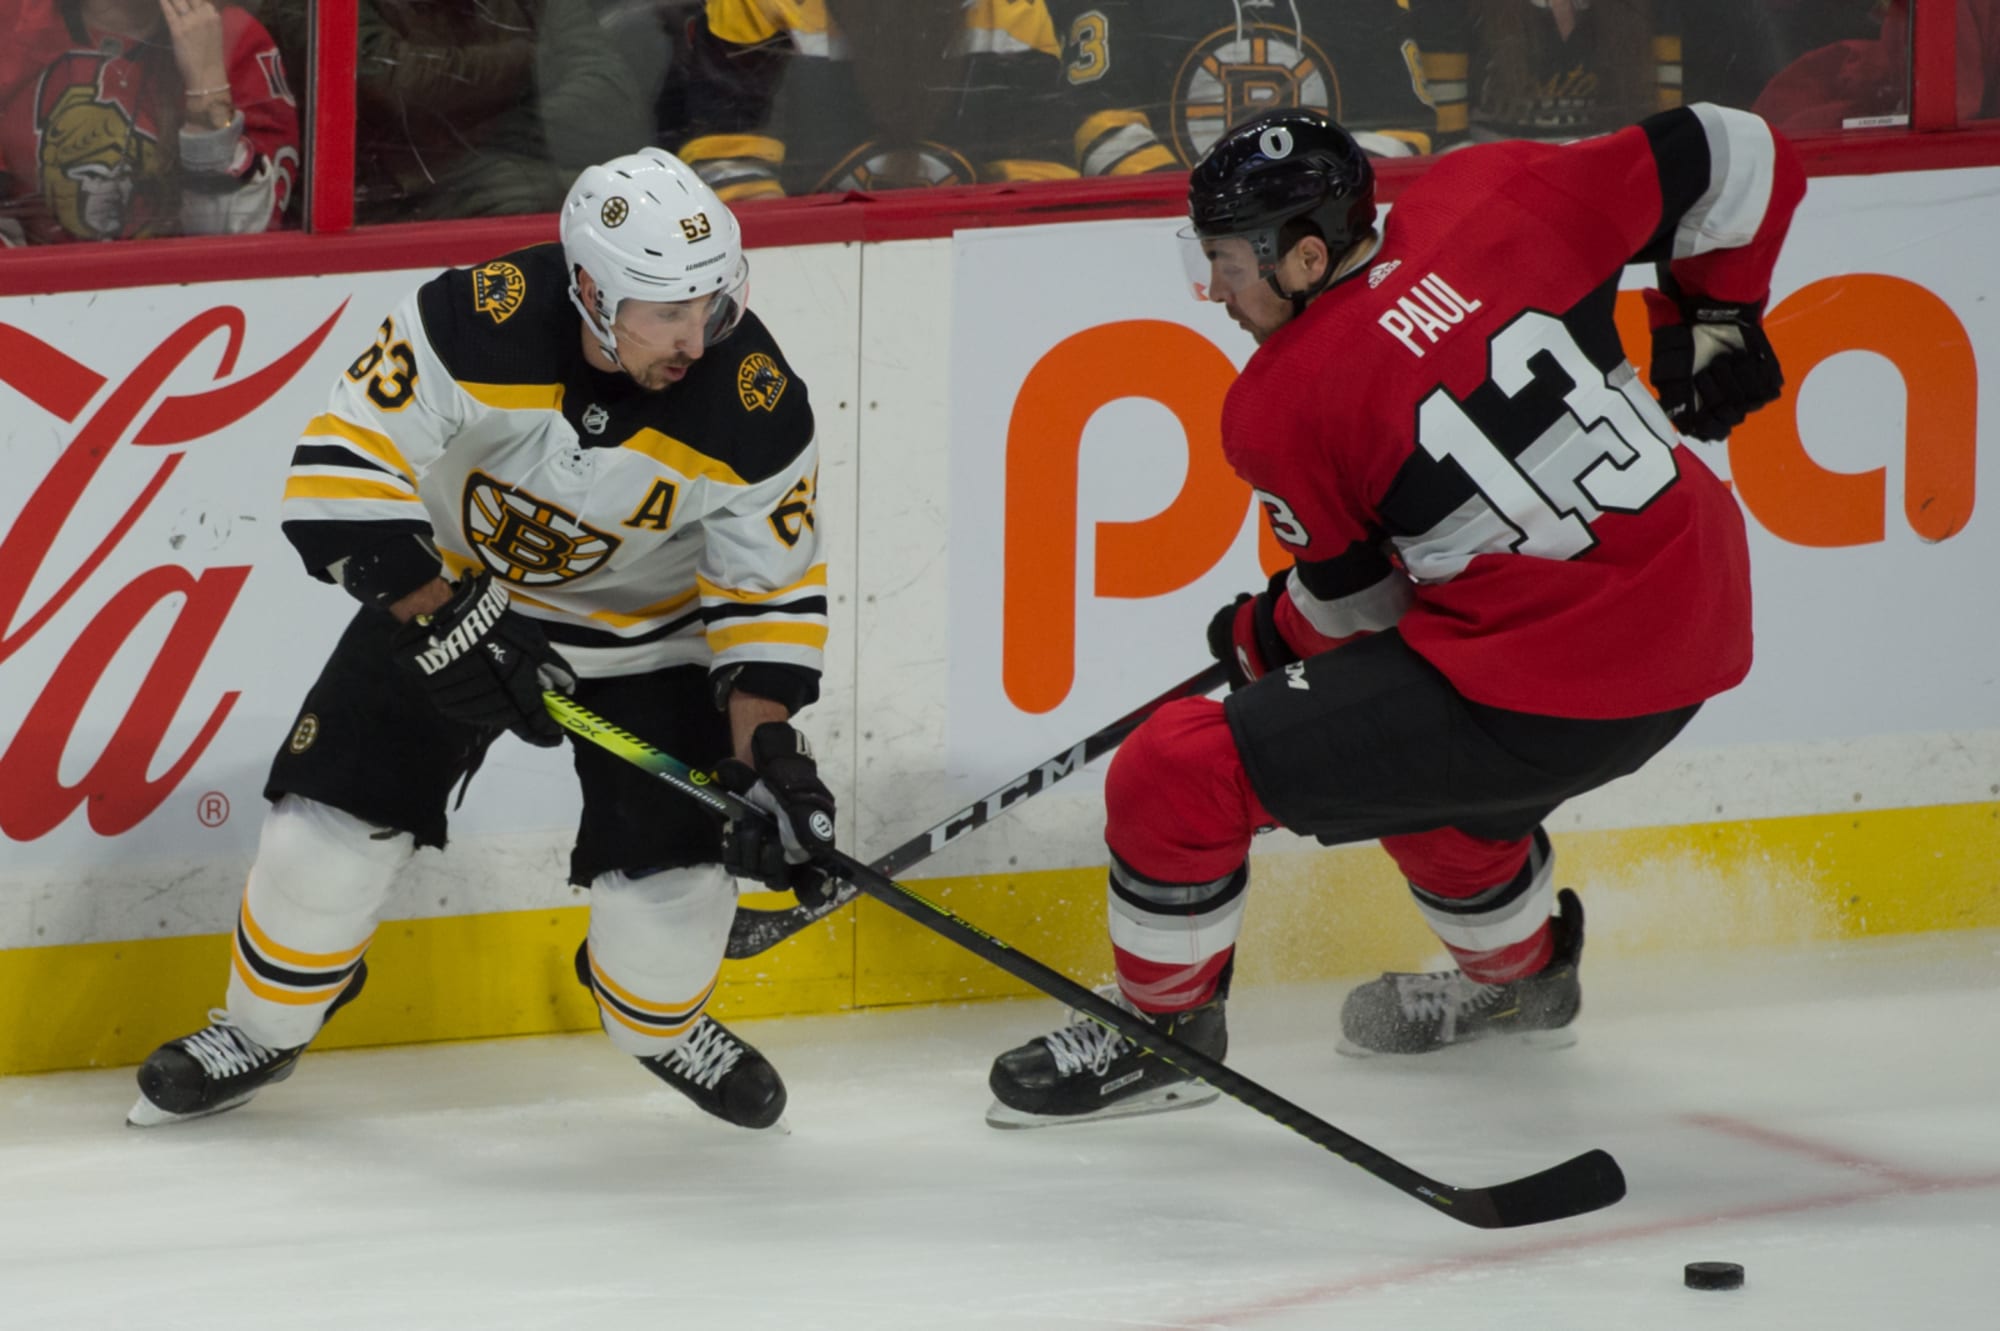 Preview Bruins vs Senators what to know, time, lines